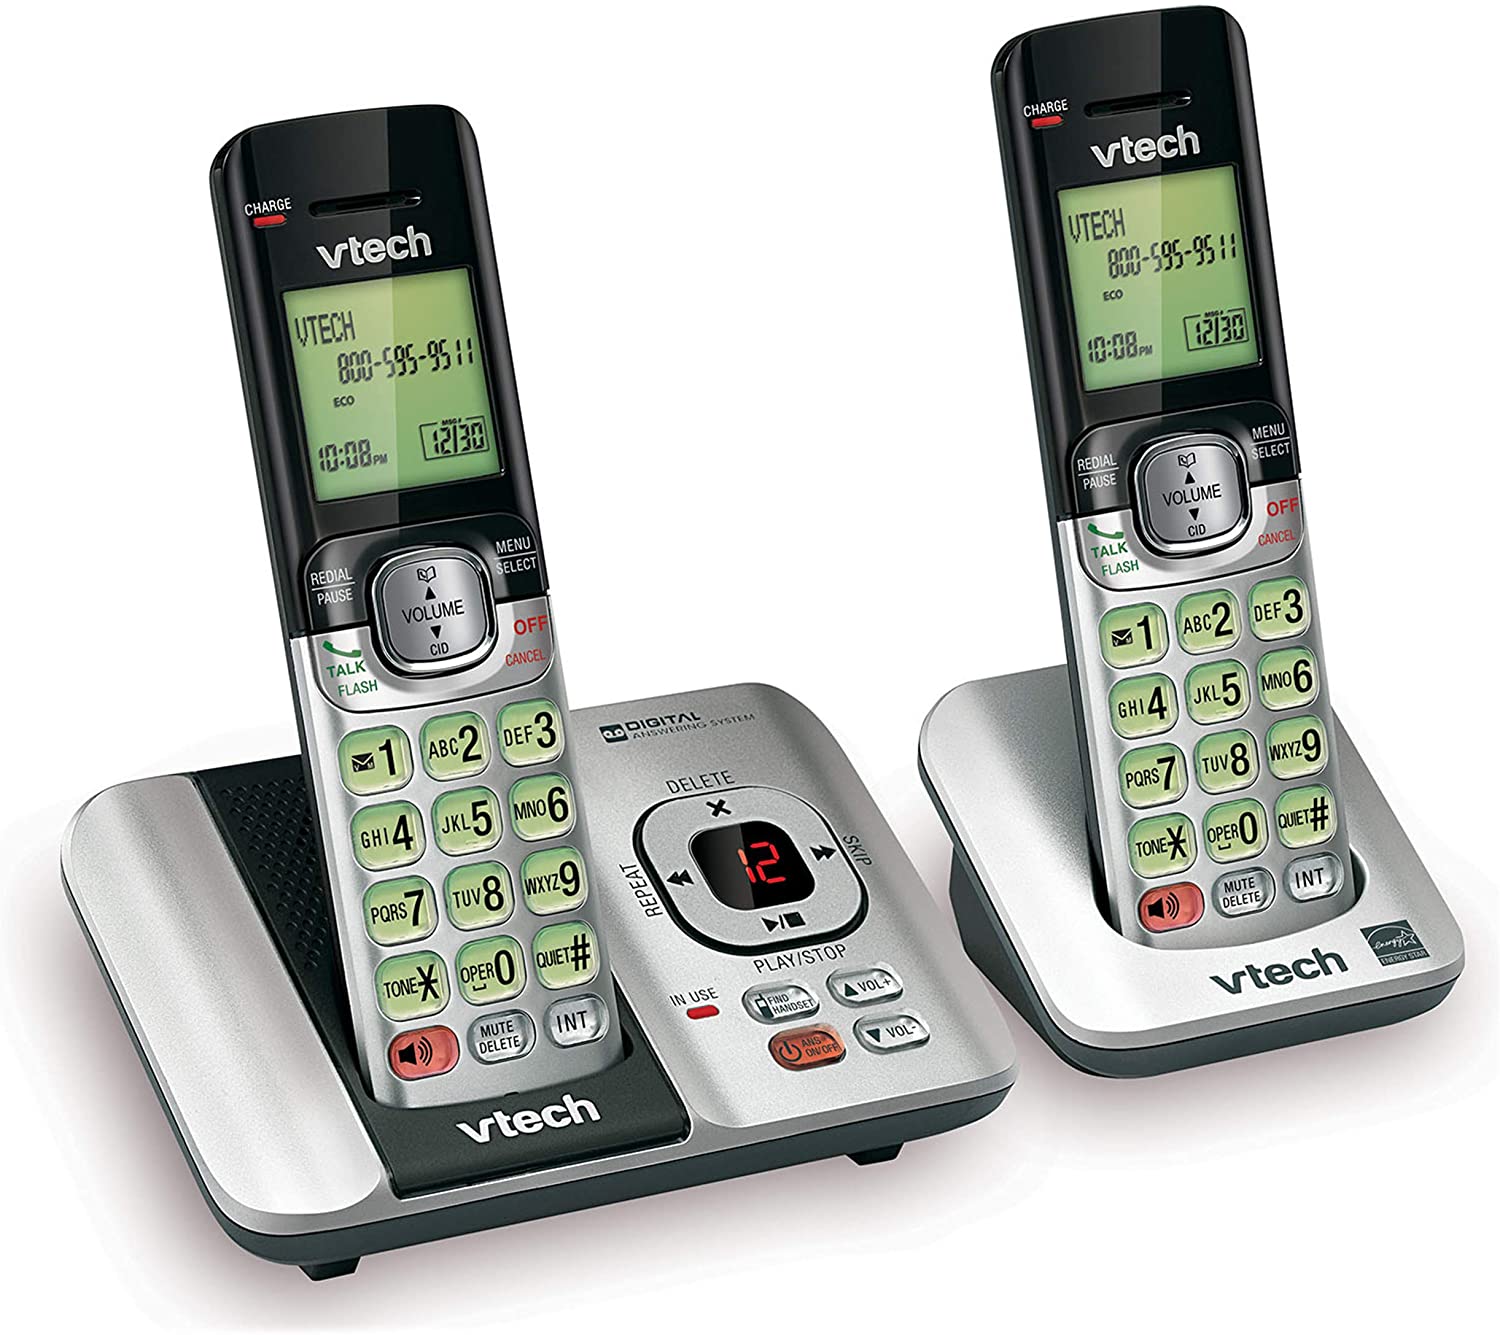 VTech CS6529-2 DECT 6.0 Phone Answering System, Silver/Black -  with Caller ID/Call Waiting, 2 Cordless Handsets